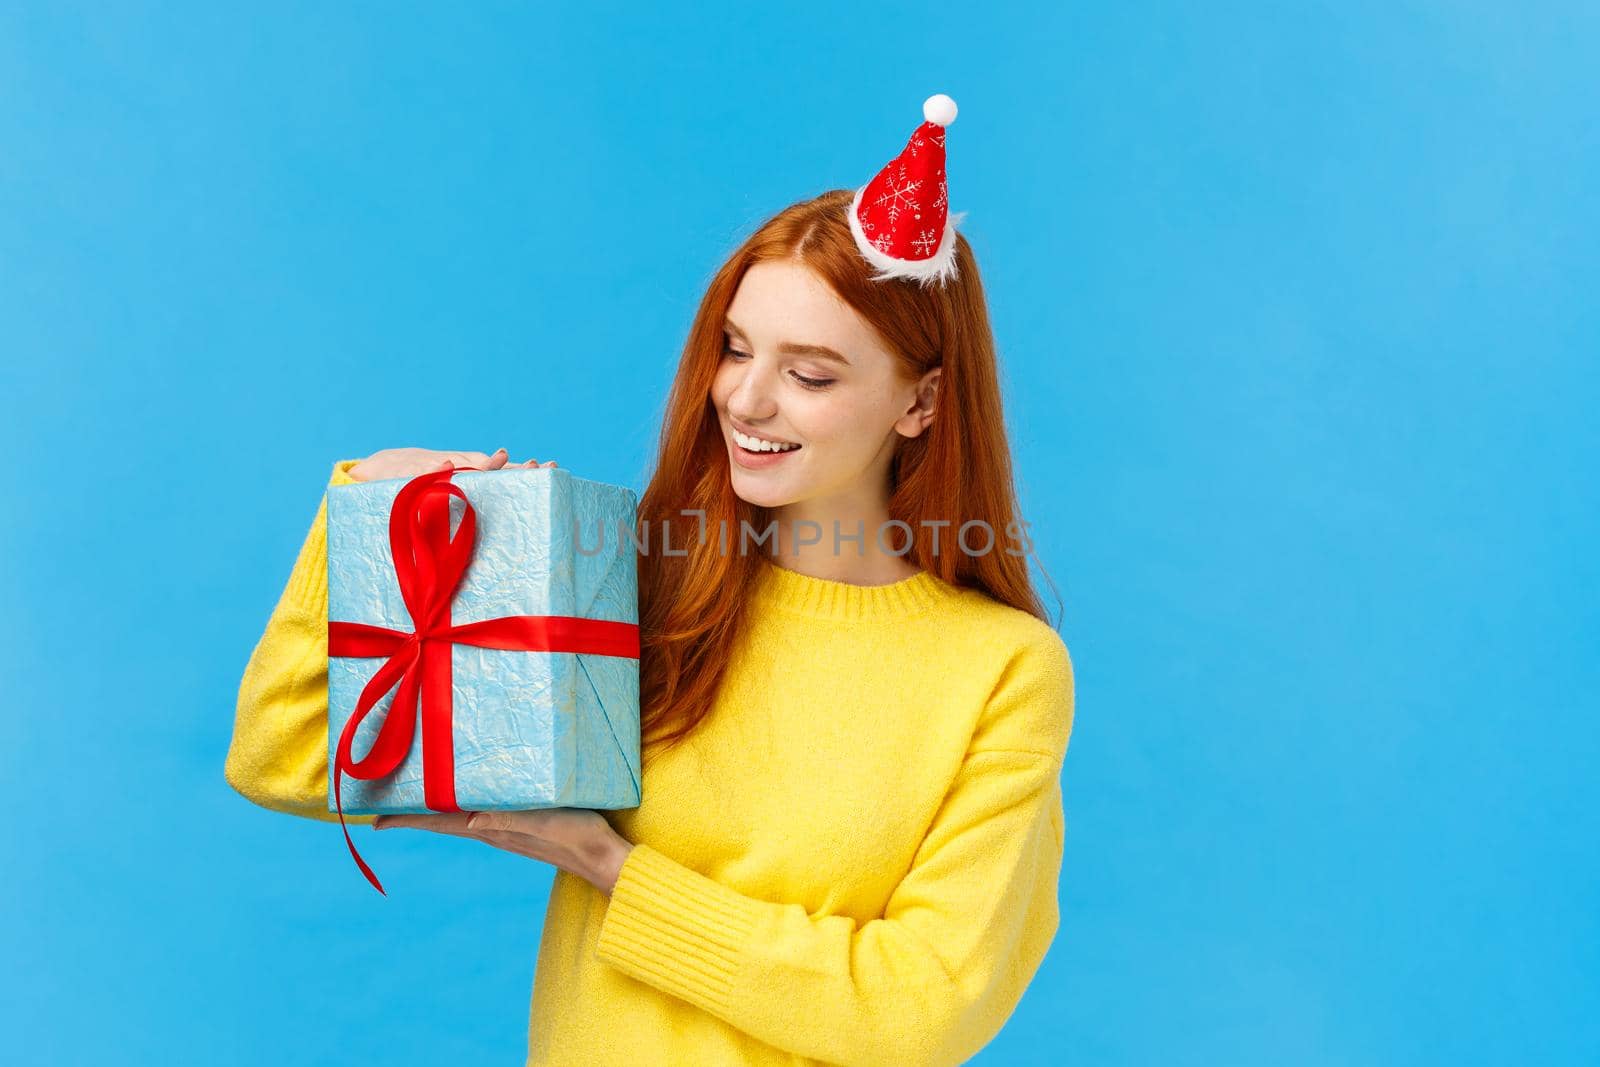 Christmas, new year and holidays concept. Attractive lovely redhead woman, girlfriend in cute hat holding wrapped gift, curious whats inside, smiling intrigued looking at present, blue background.